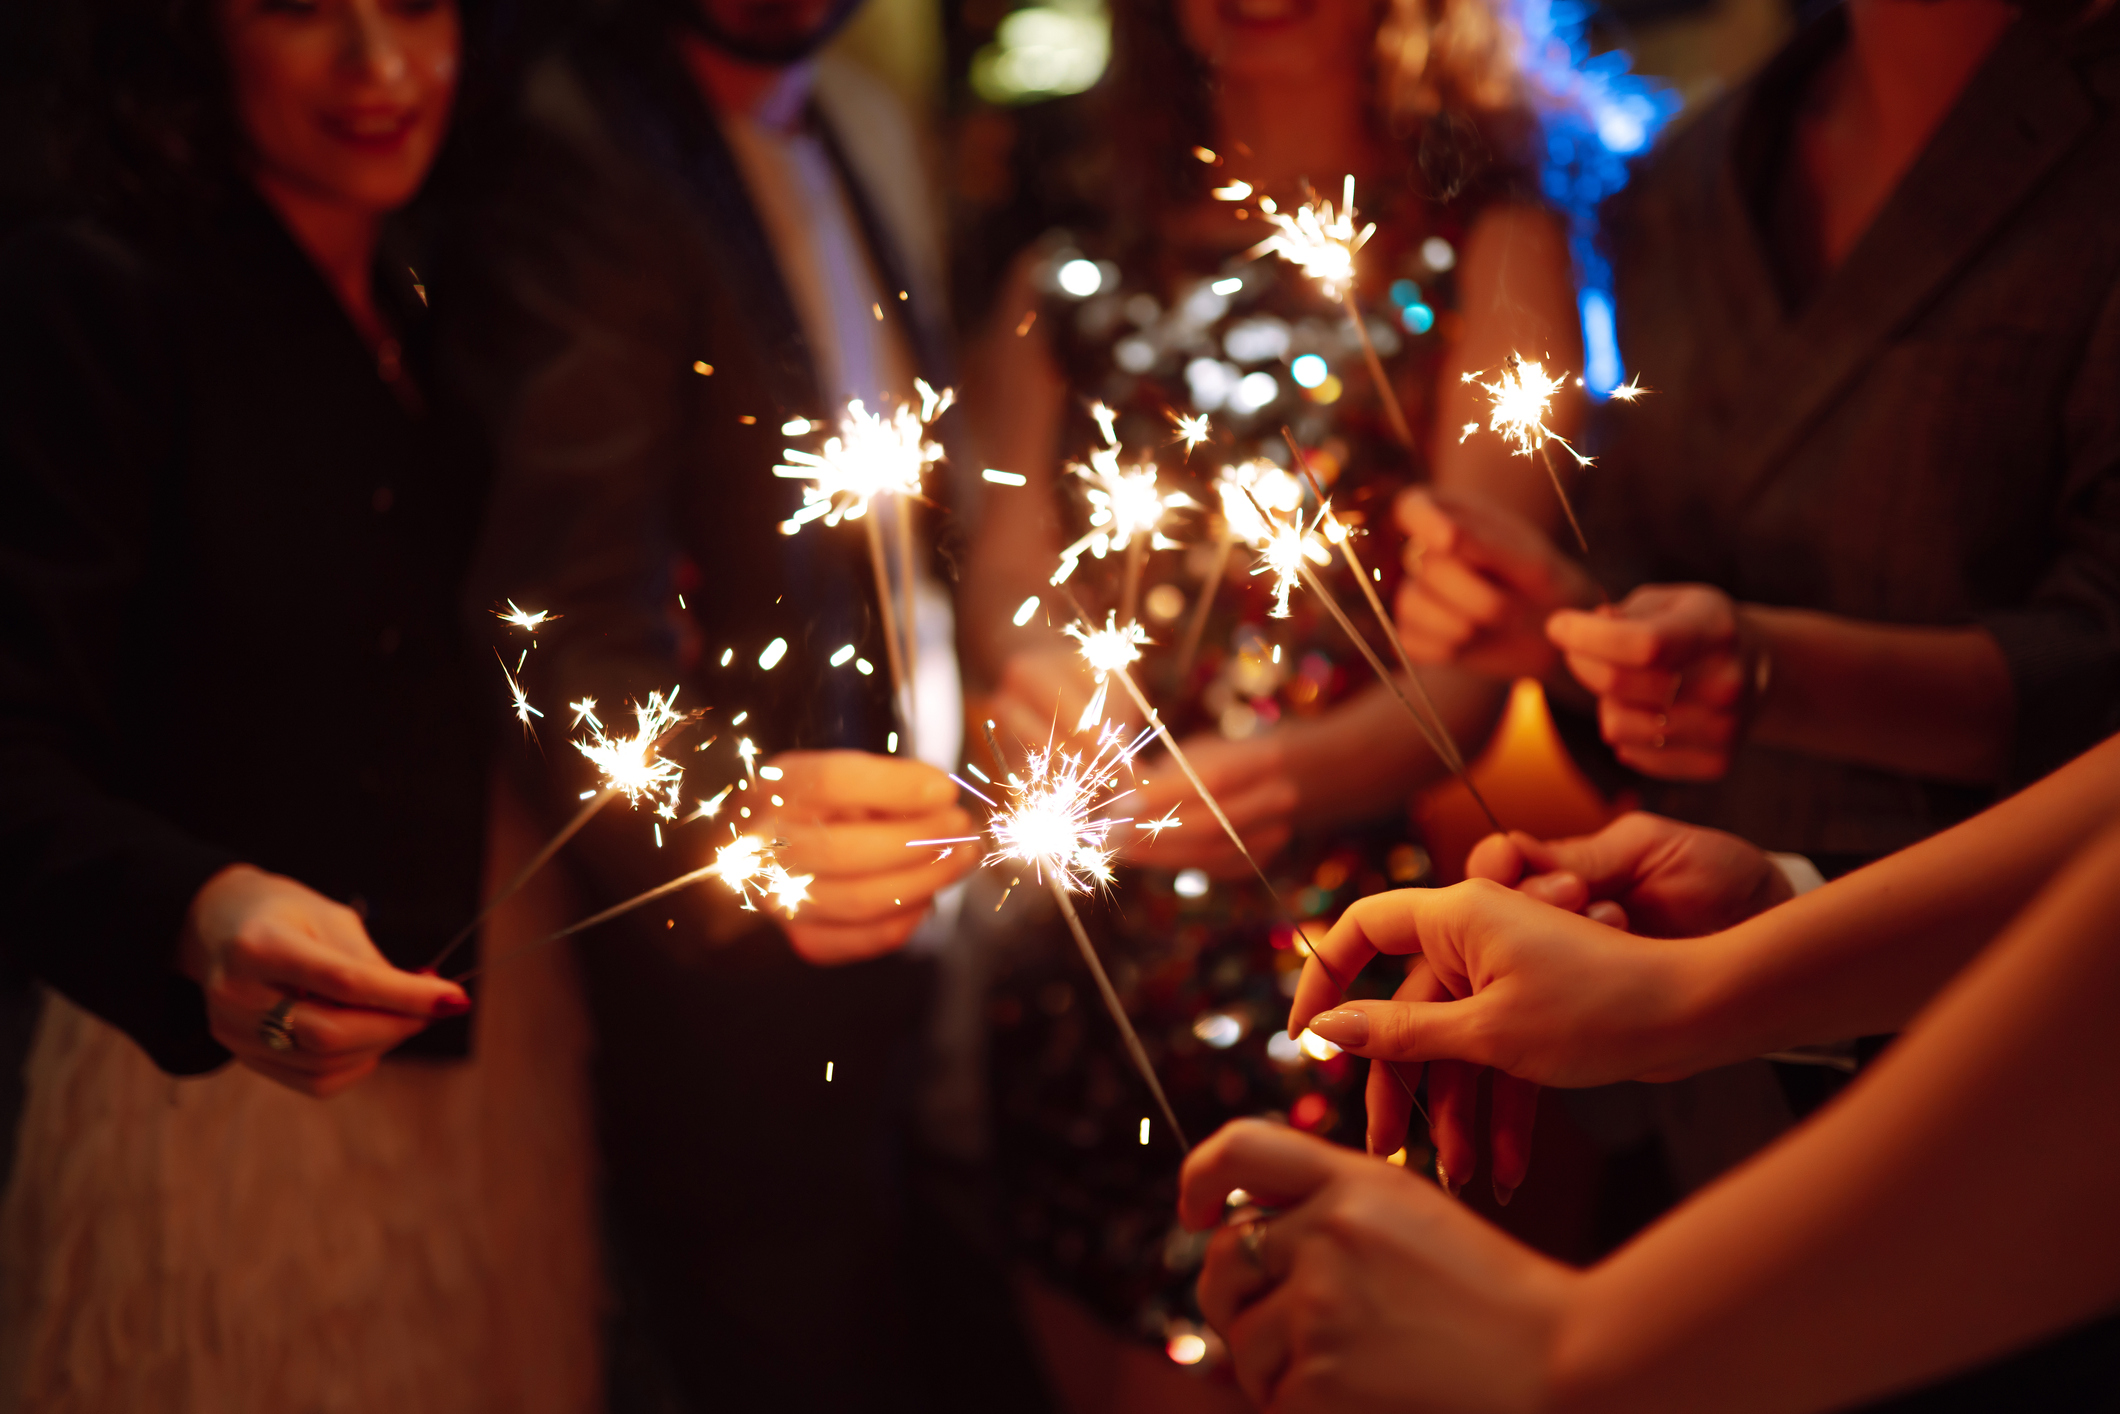 A group of people smiling and holding glowing sparklers.